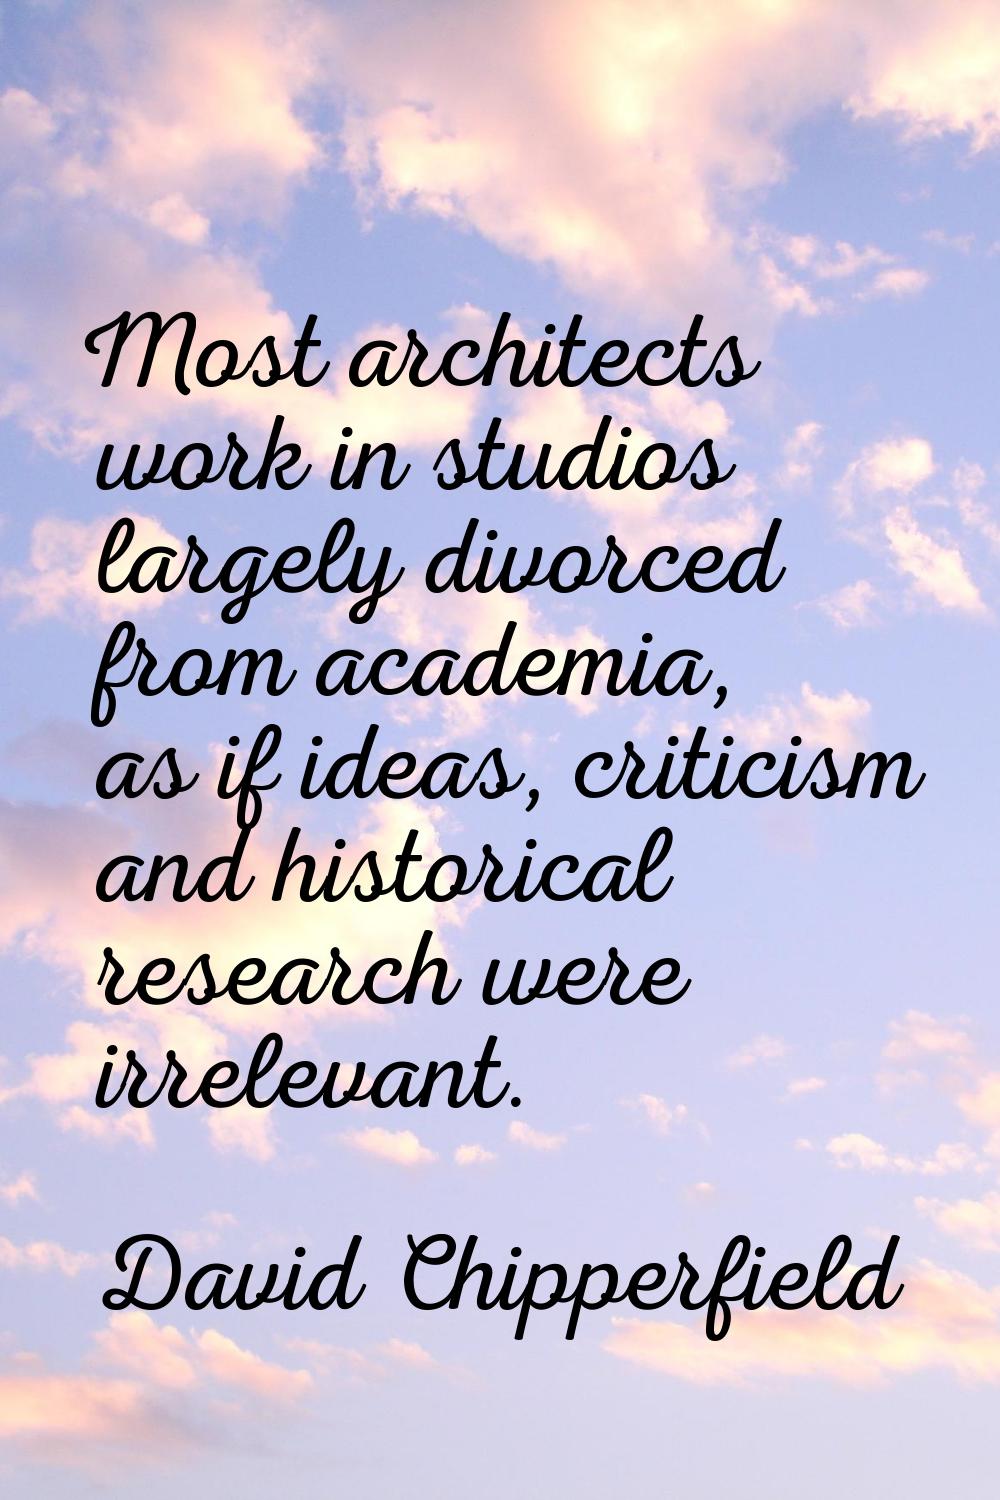 Most architects work in studios largely divorced from academia, as if ideas, criticism and historic